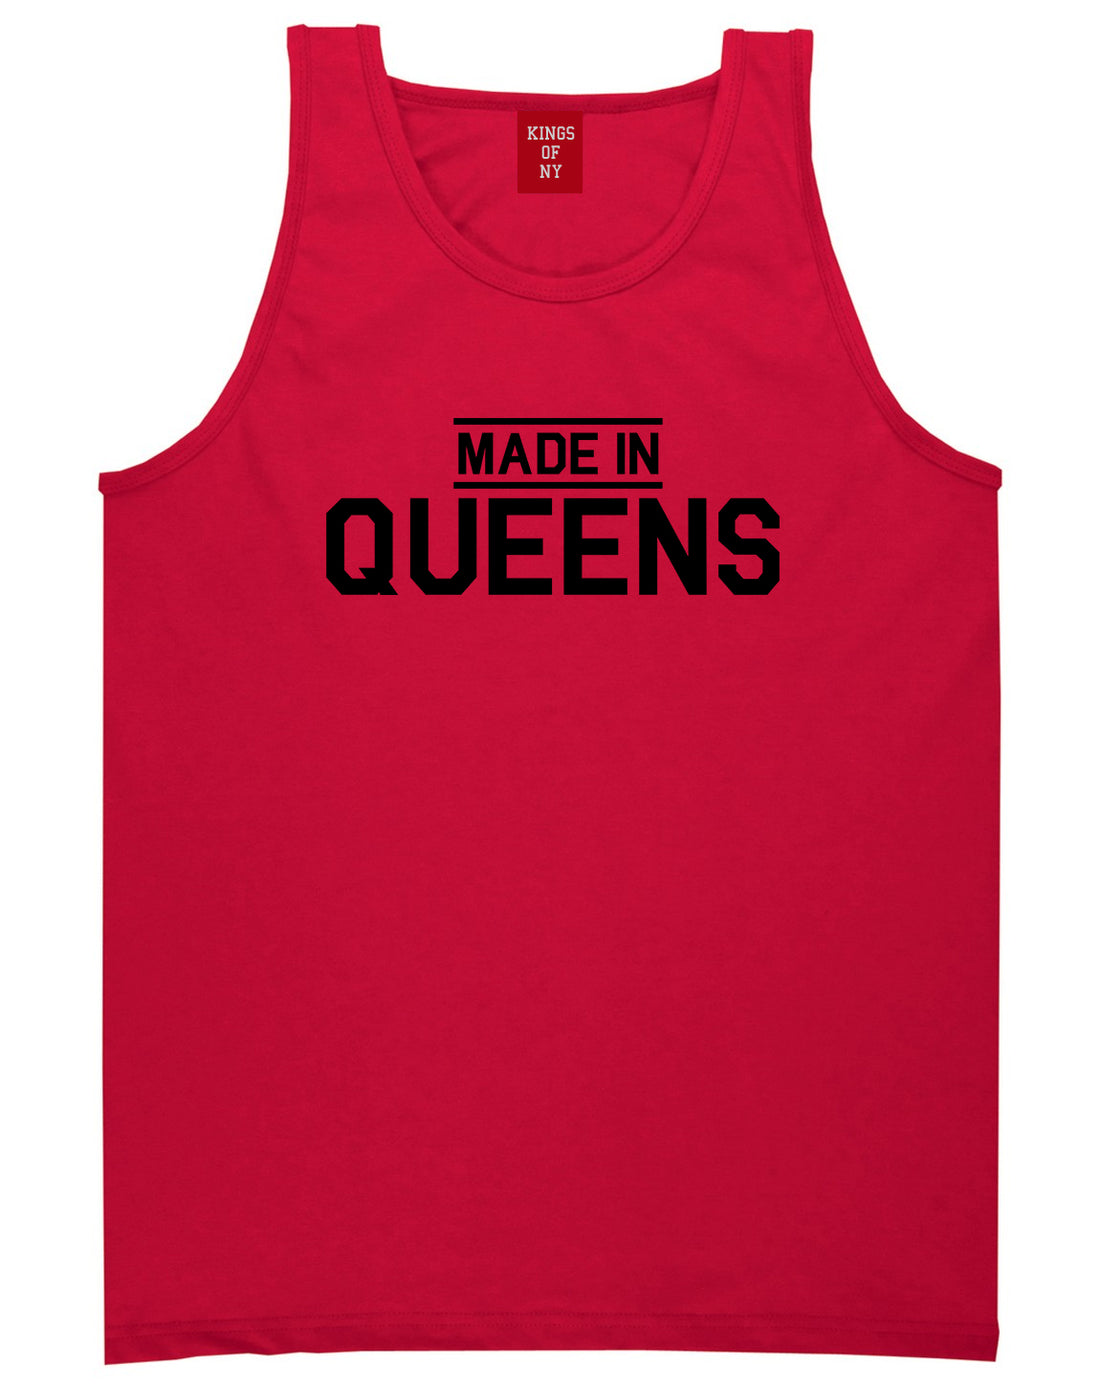 Made In Queens NY Mens Tank Top T-Shirt Red